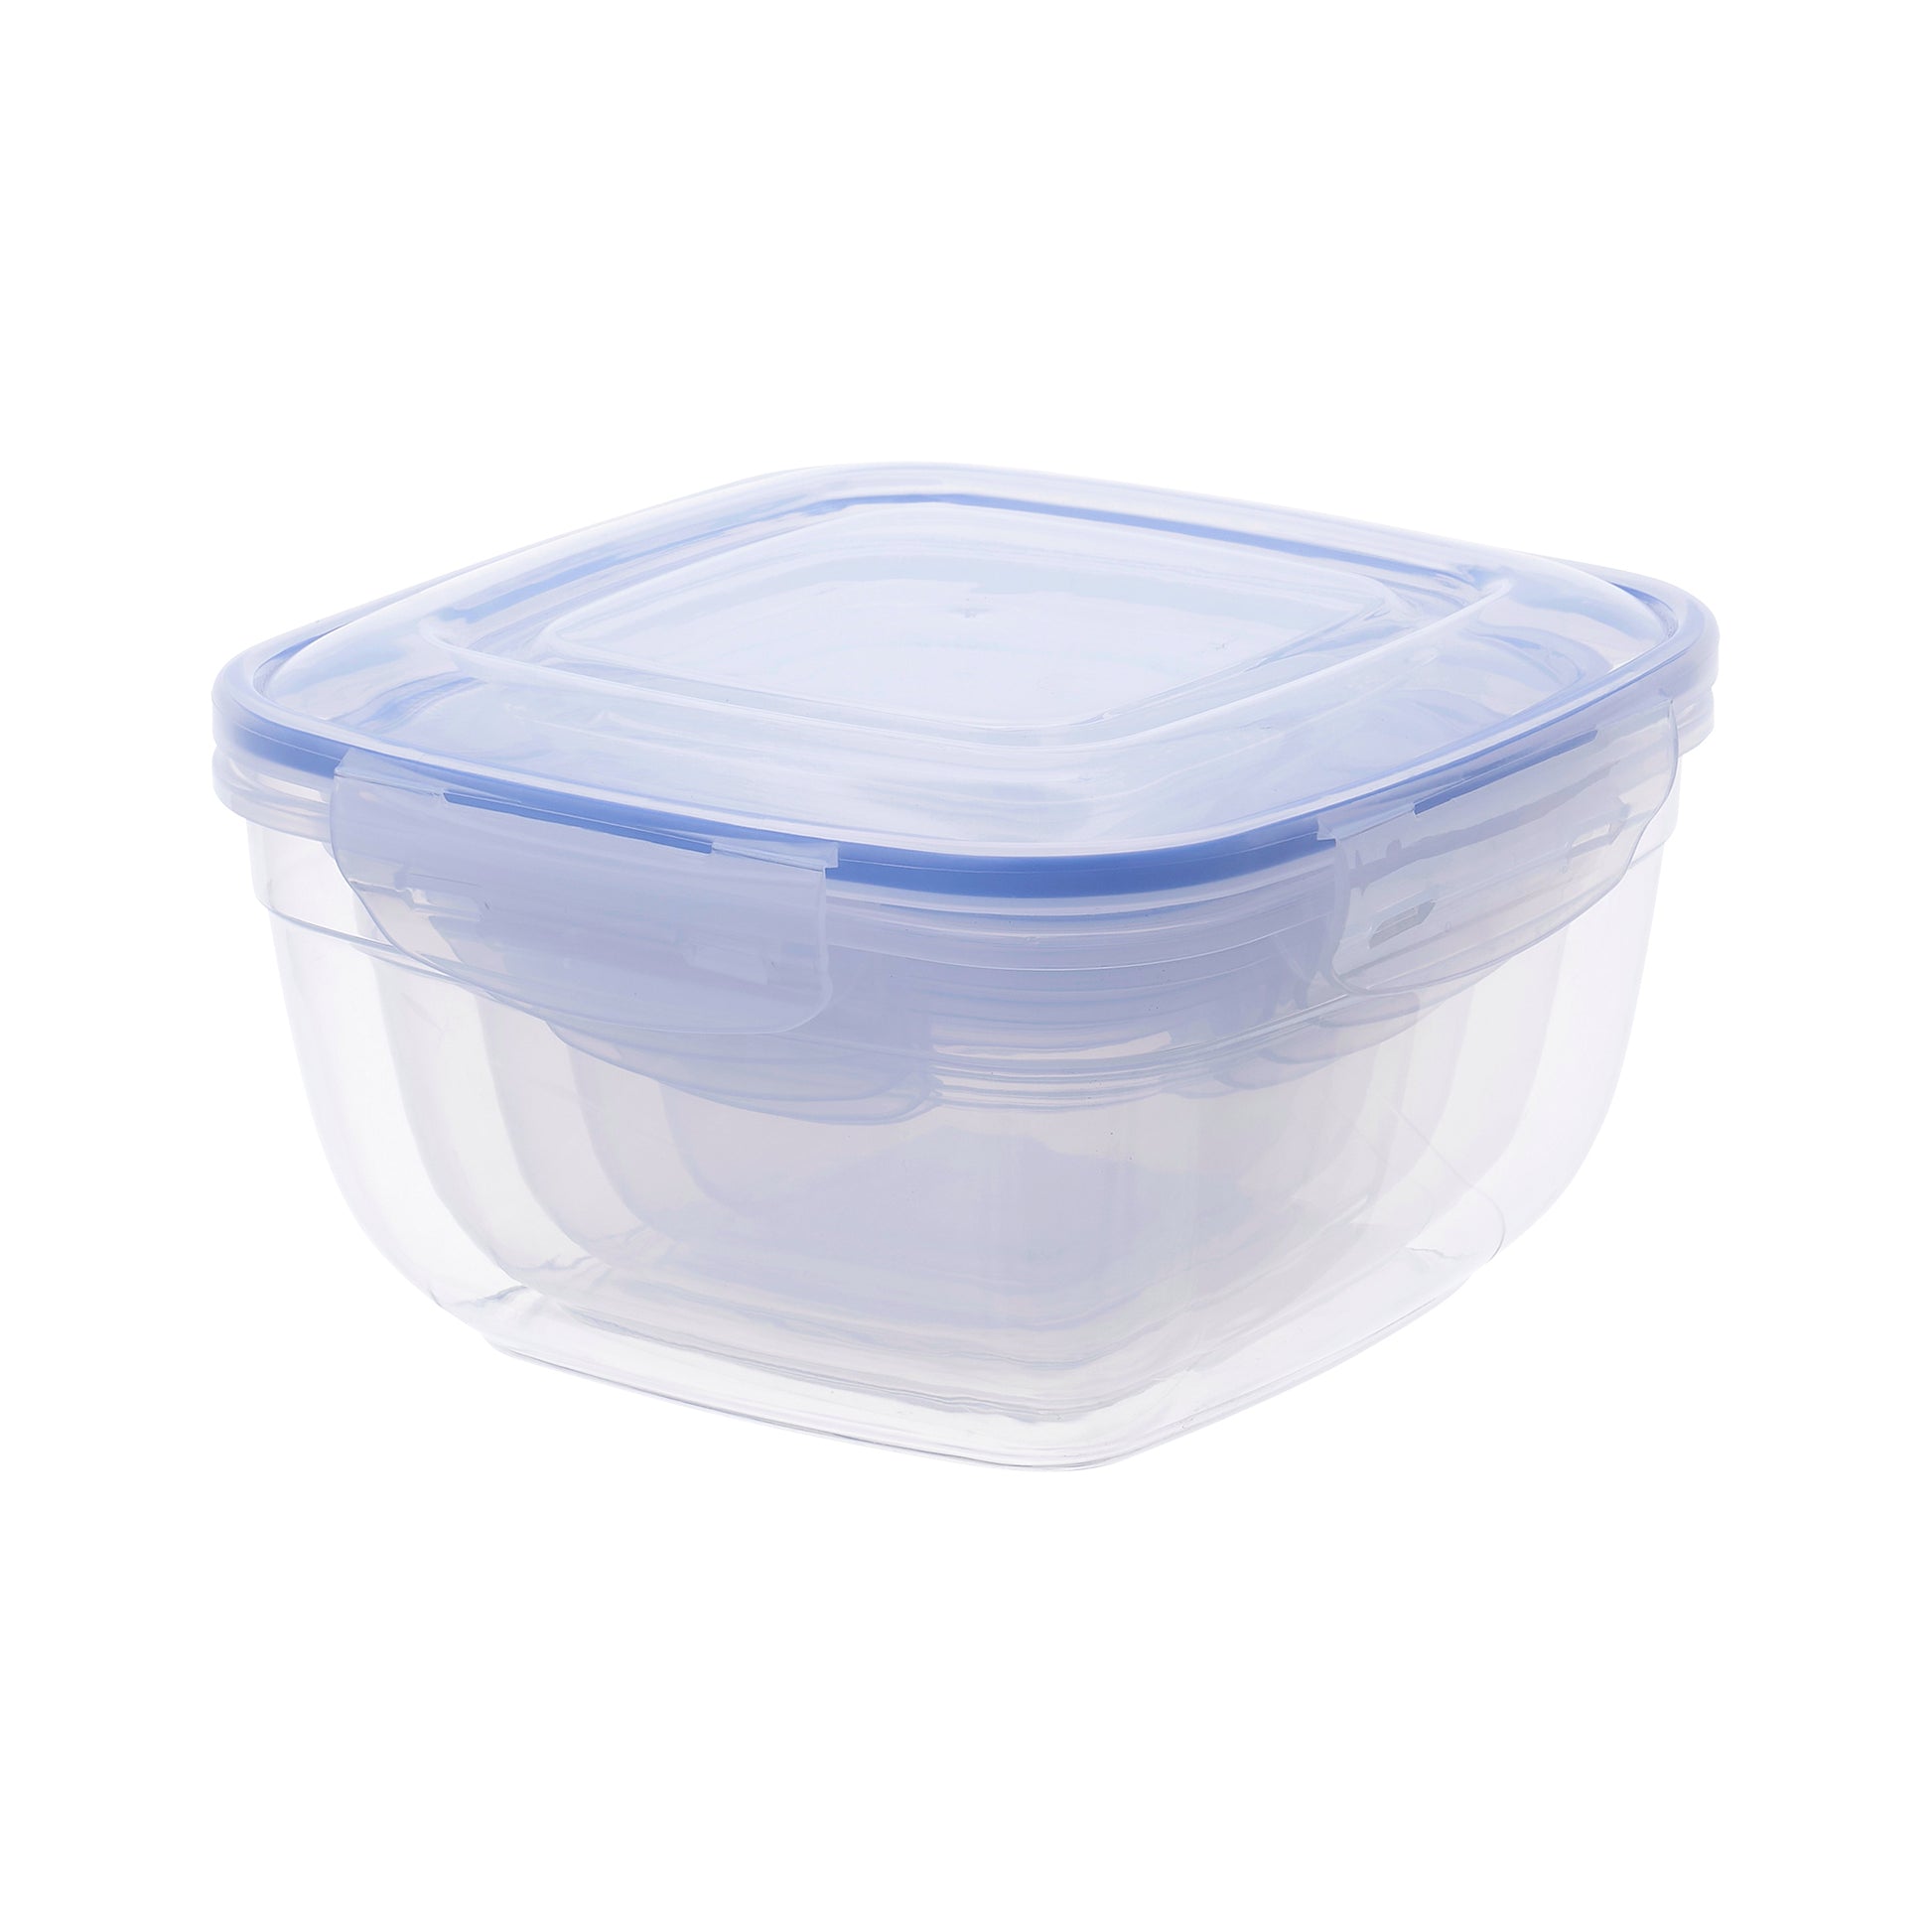 Superio Clear Plastic Storage Bins with Lids- Stackable Organizer